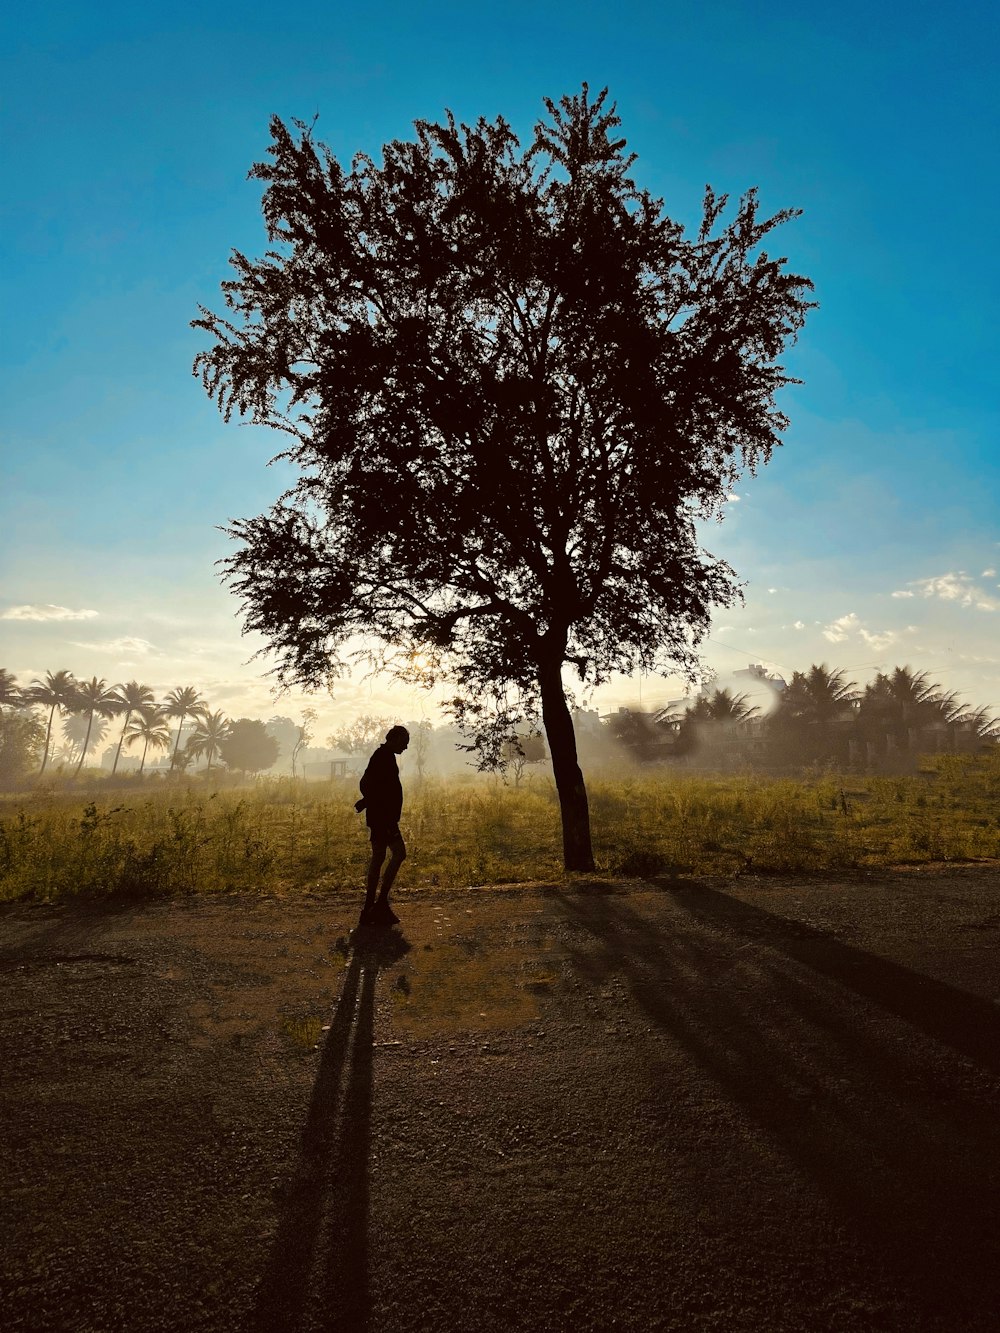 a person standing next to a tree on a dirt road